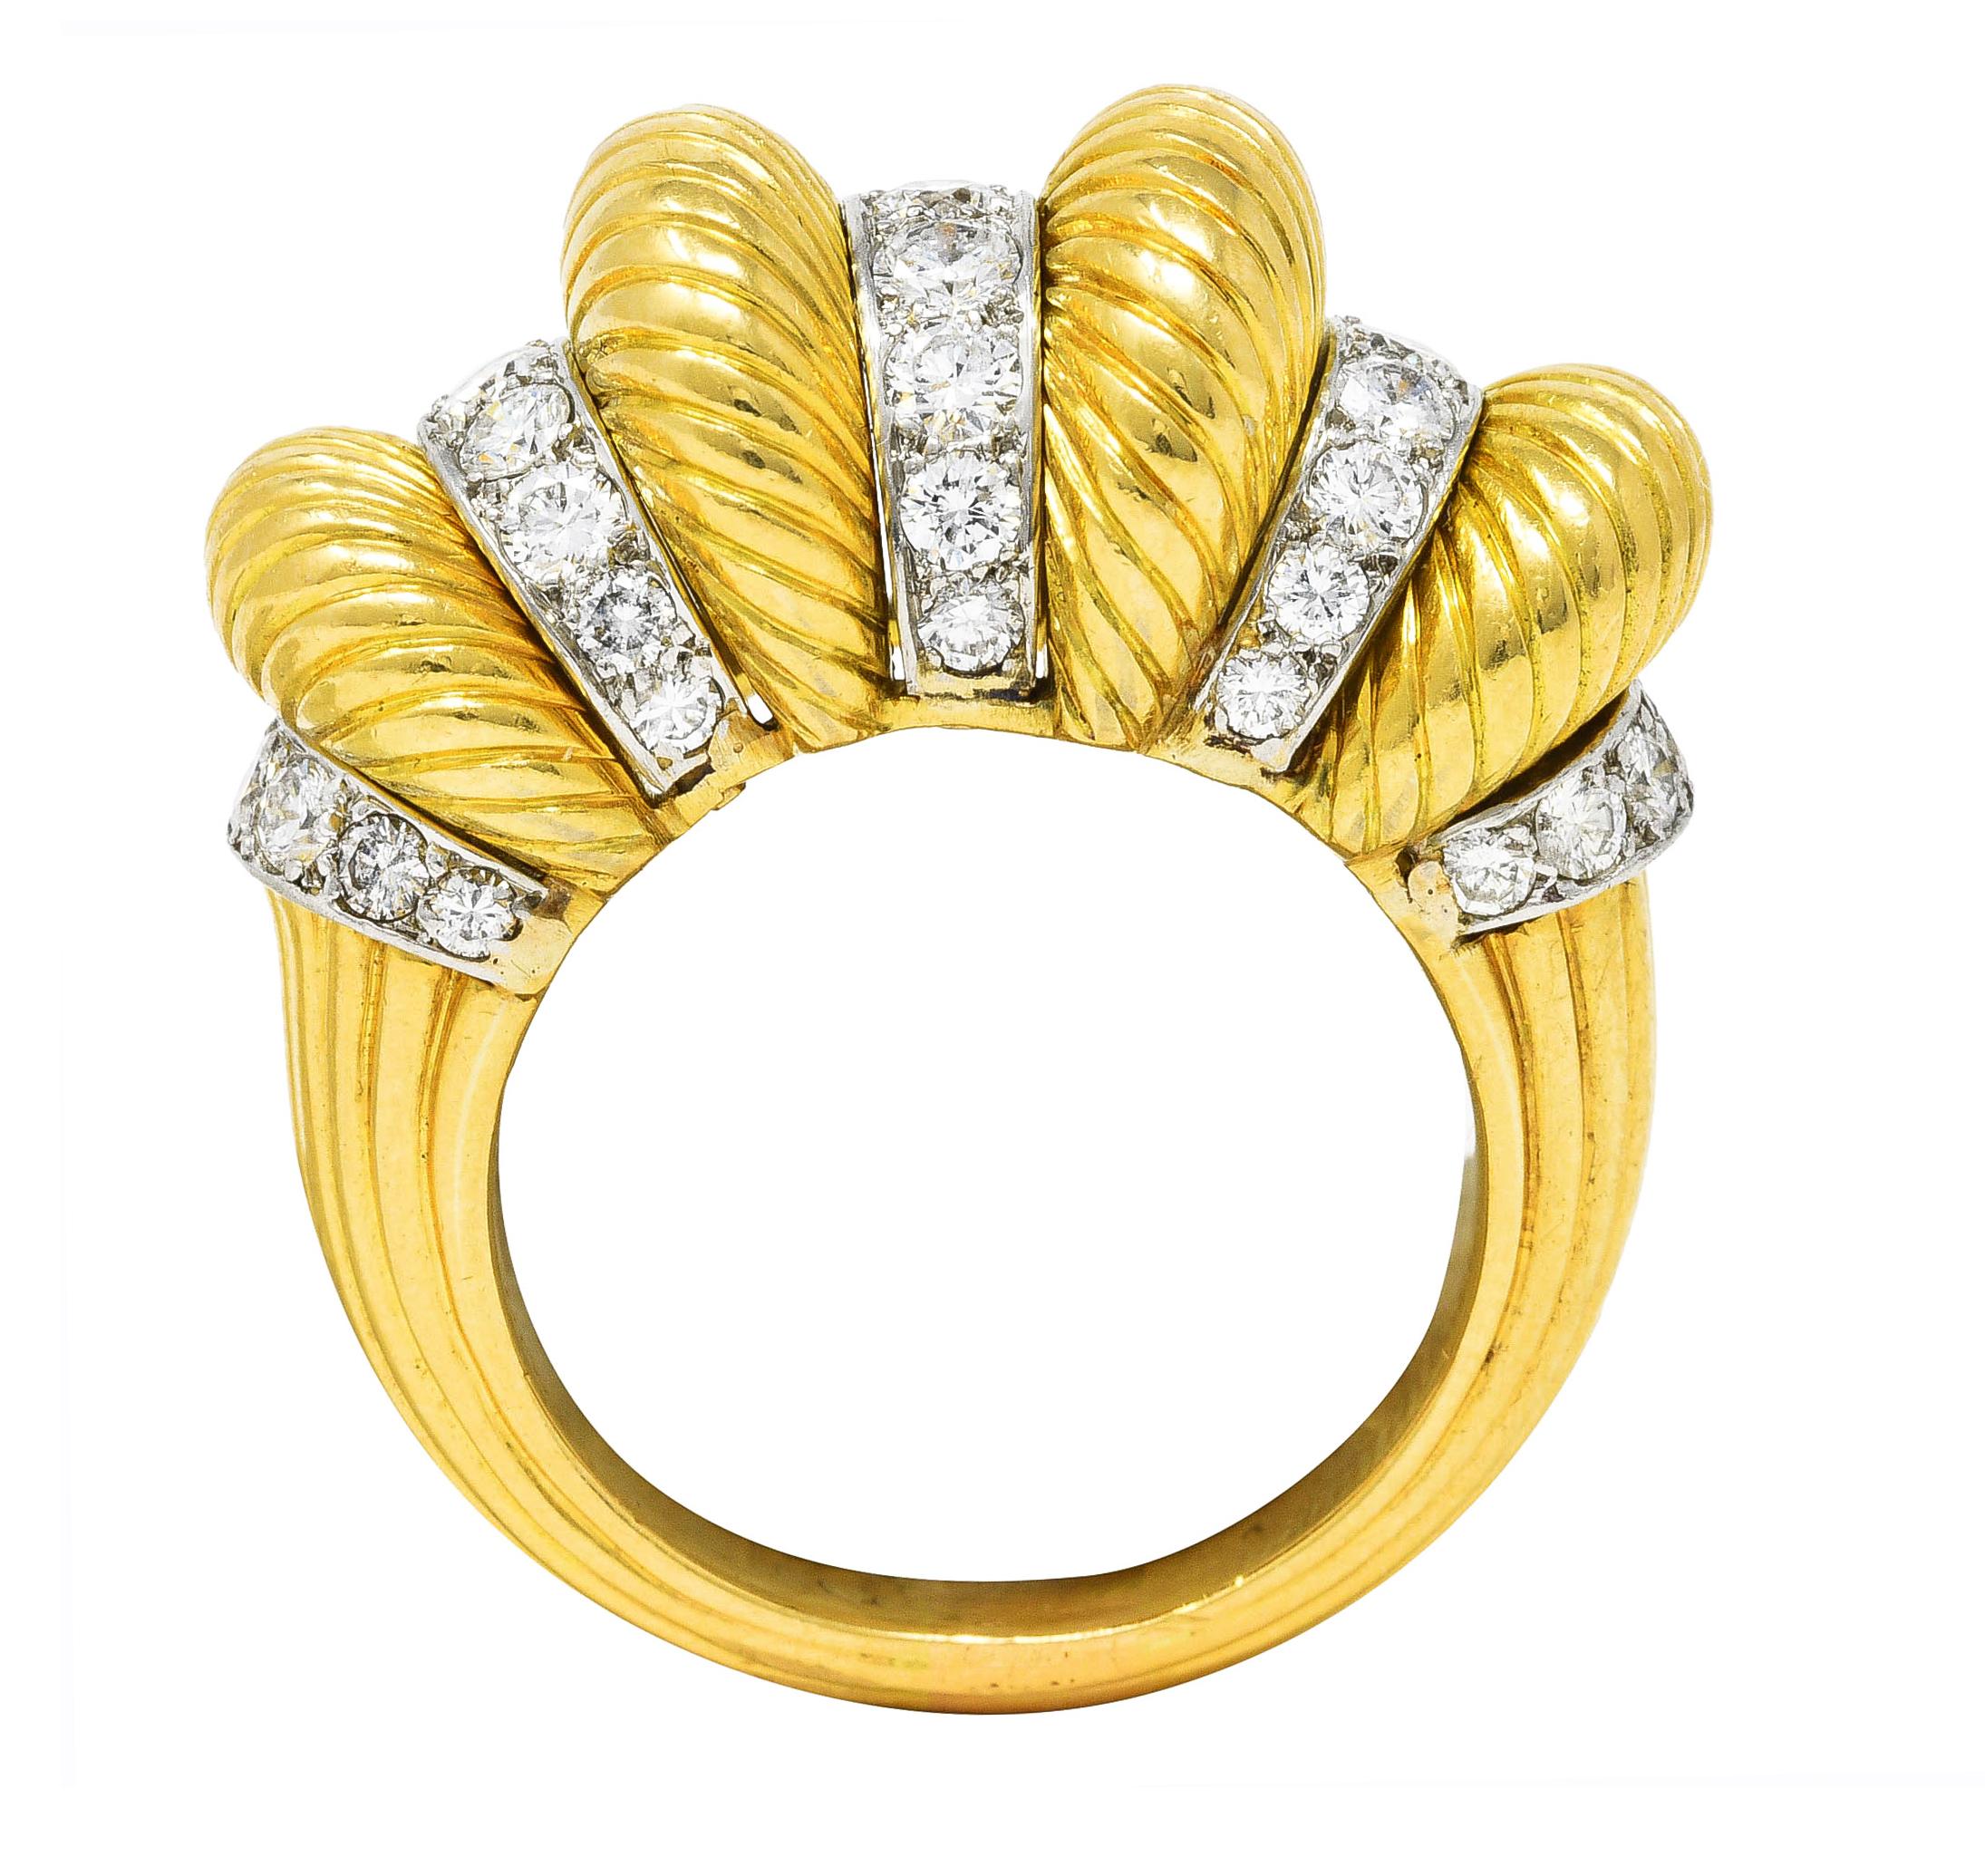 Cocktail ring is designed as puffed gold segments with ridged textured throughout

Alternating with white gold recesses pavè set with round brilliant cut diamonds

Weighing approximately 1.50 carats total - G/H in color with VS clarity

Completed by